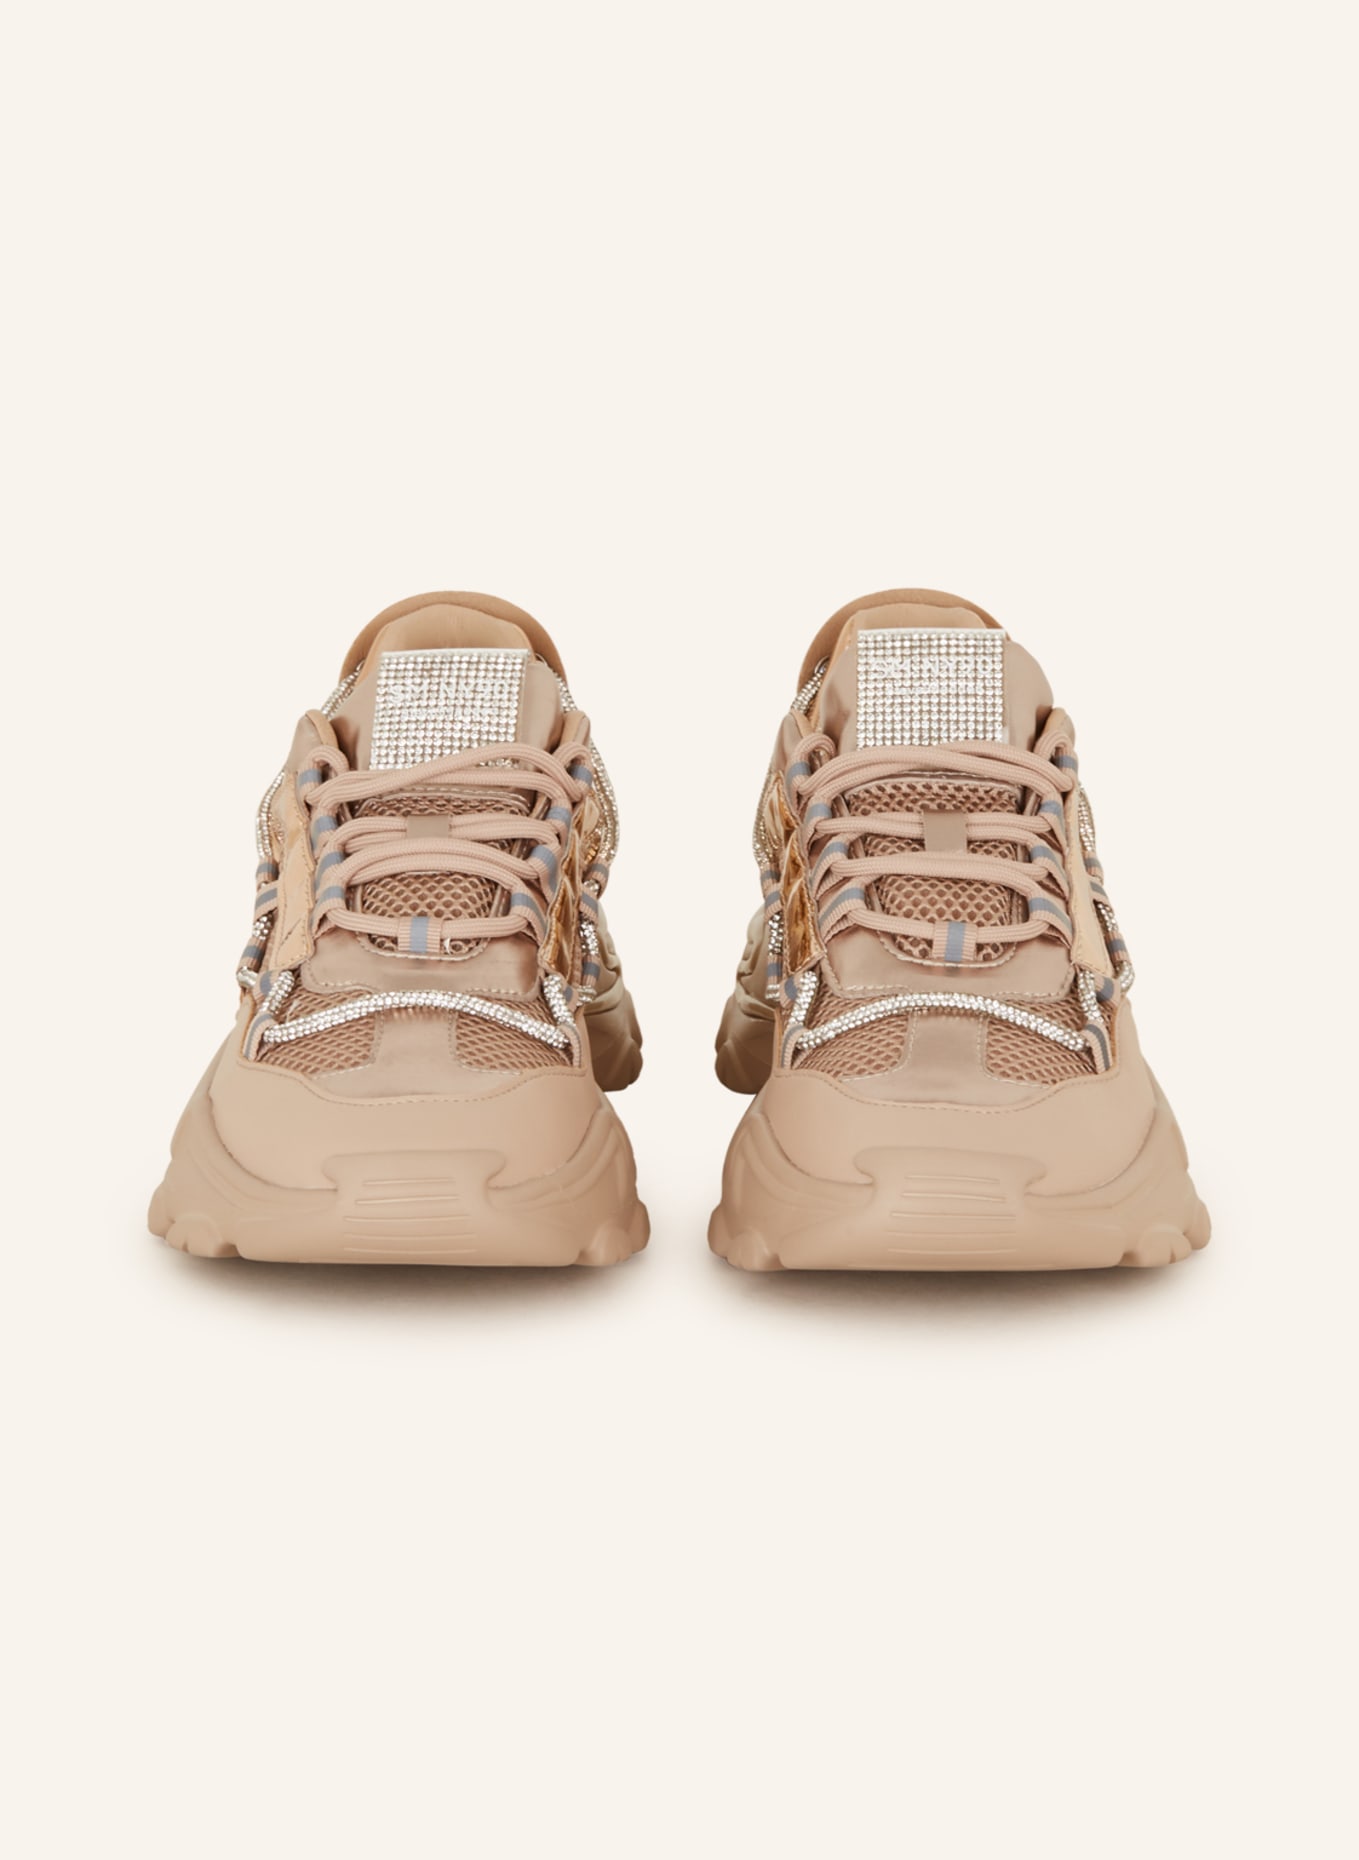 dok kom videre Hub STEVE MADDEN Sneakers MIRACLES with decorative gems in nude/ rose